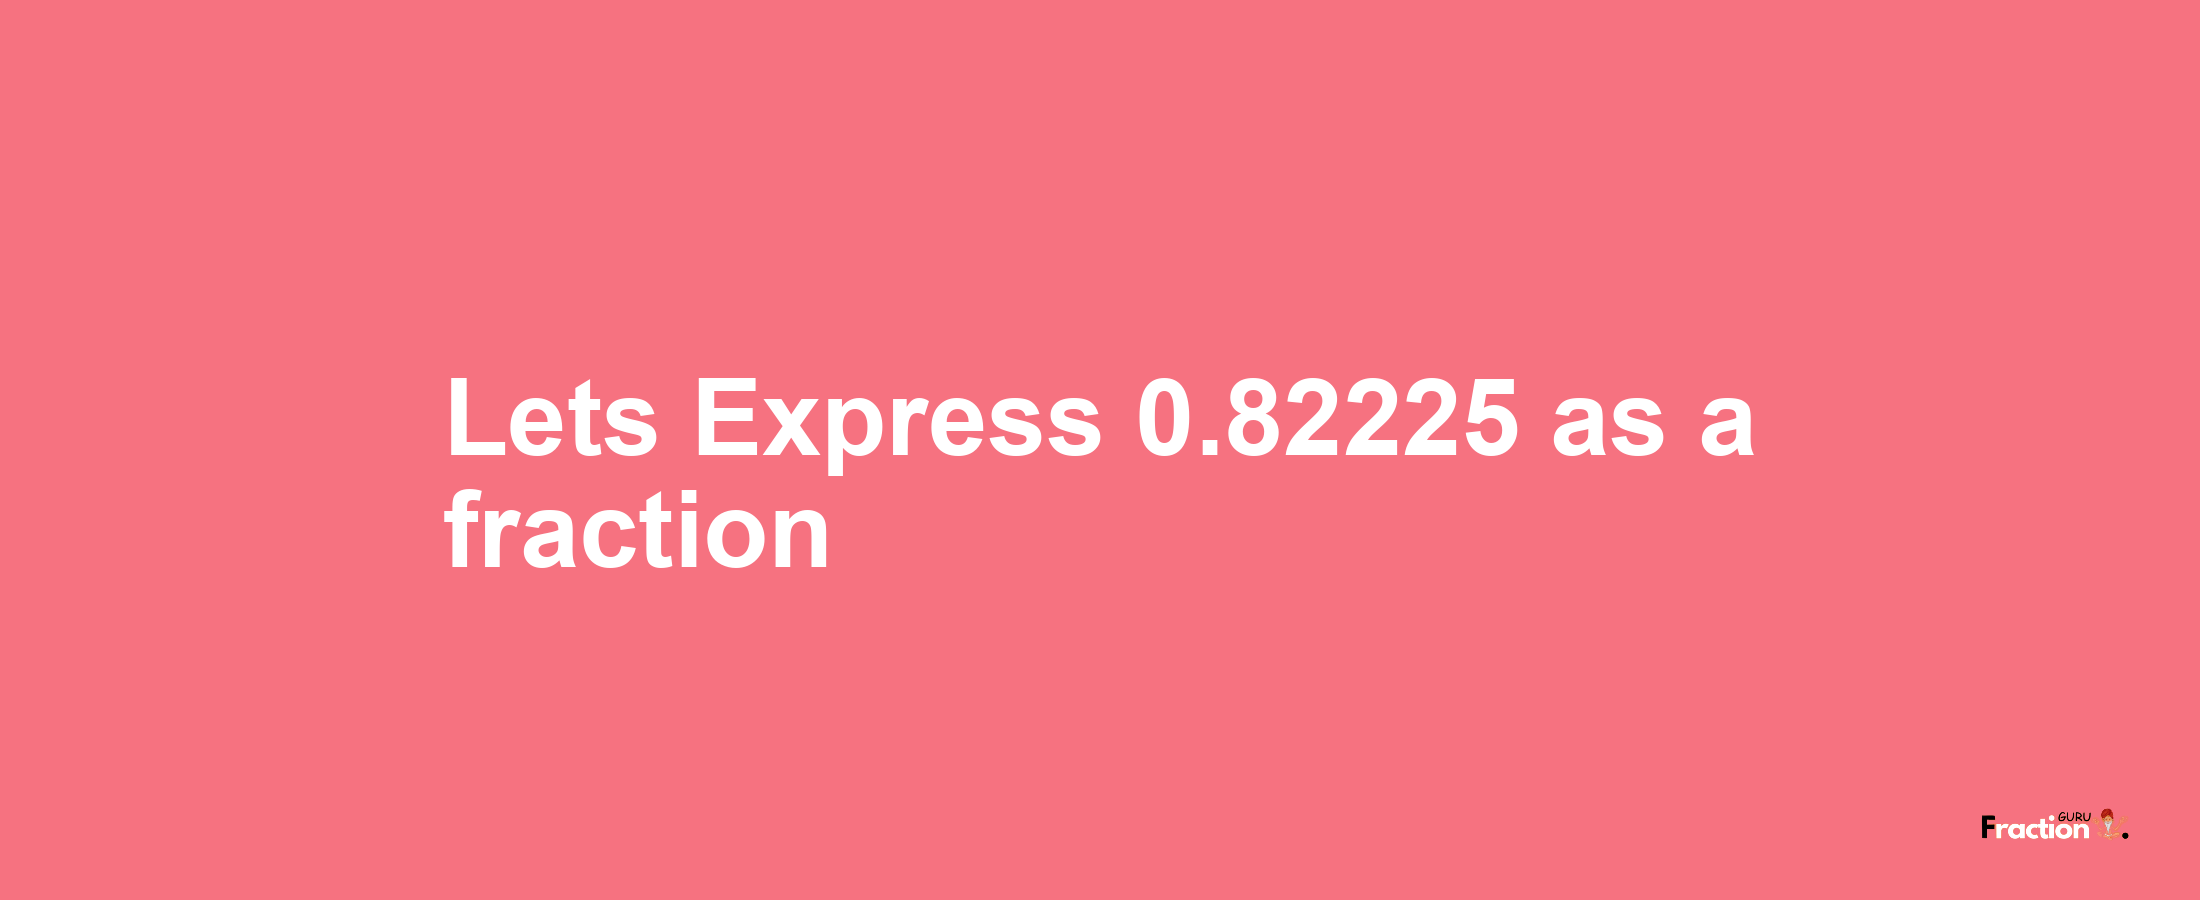 Lets Express 0.82225 as afraction